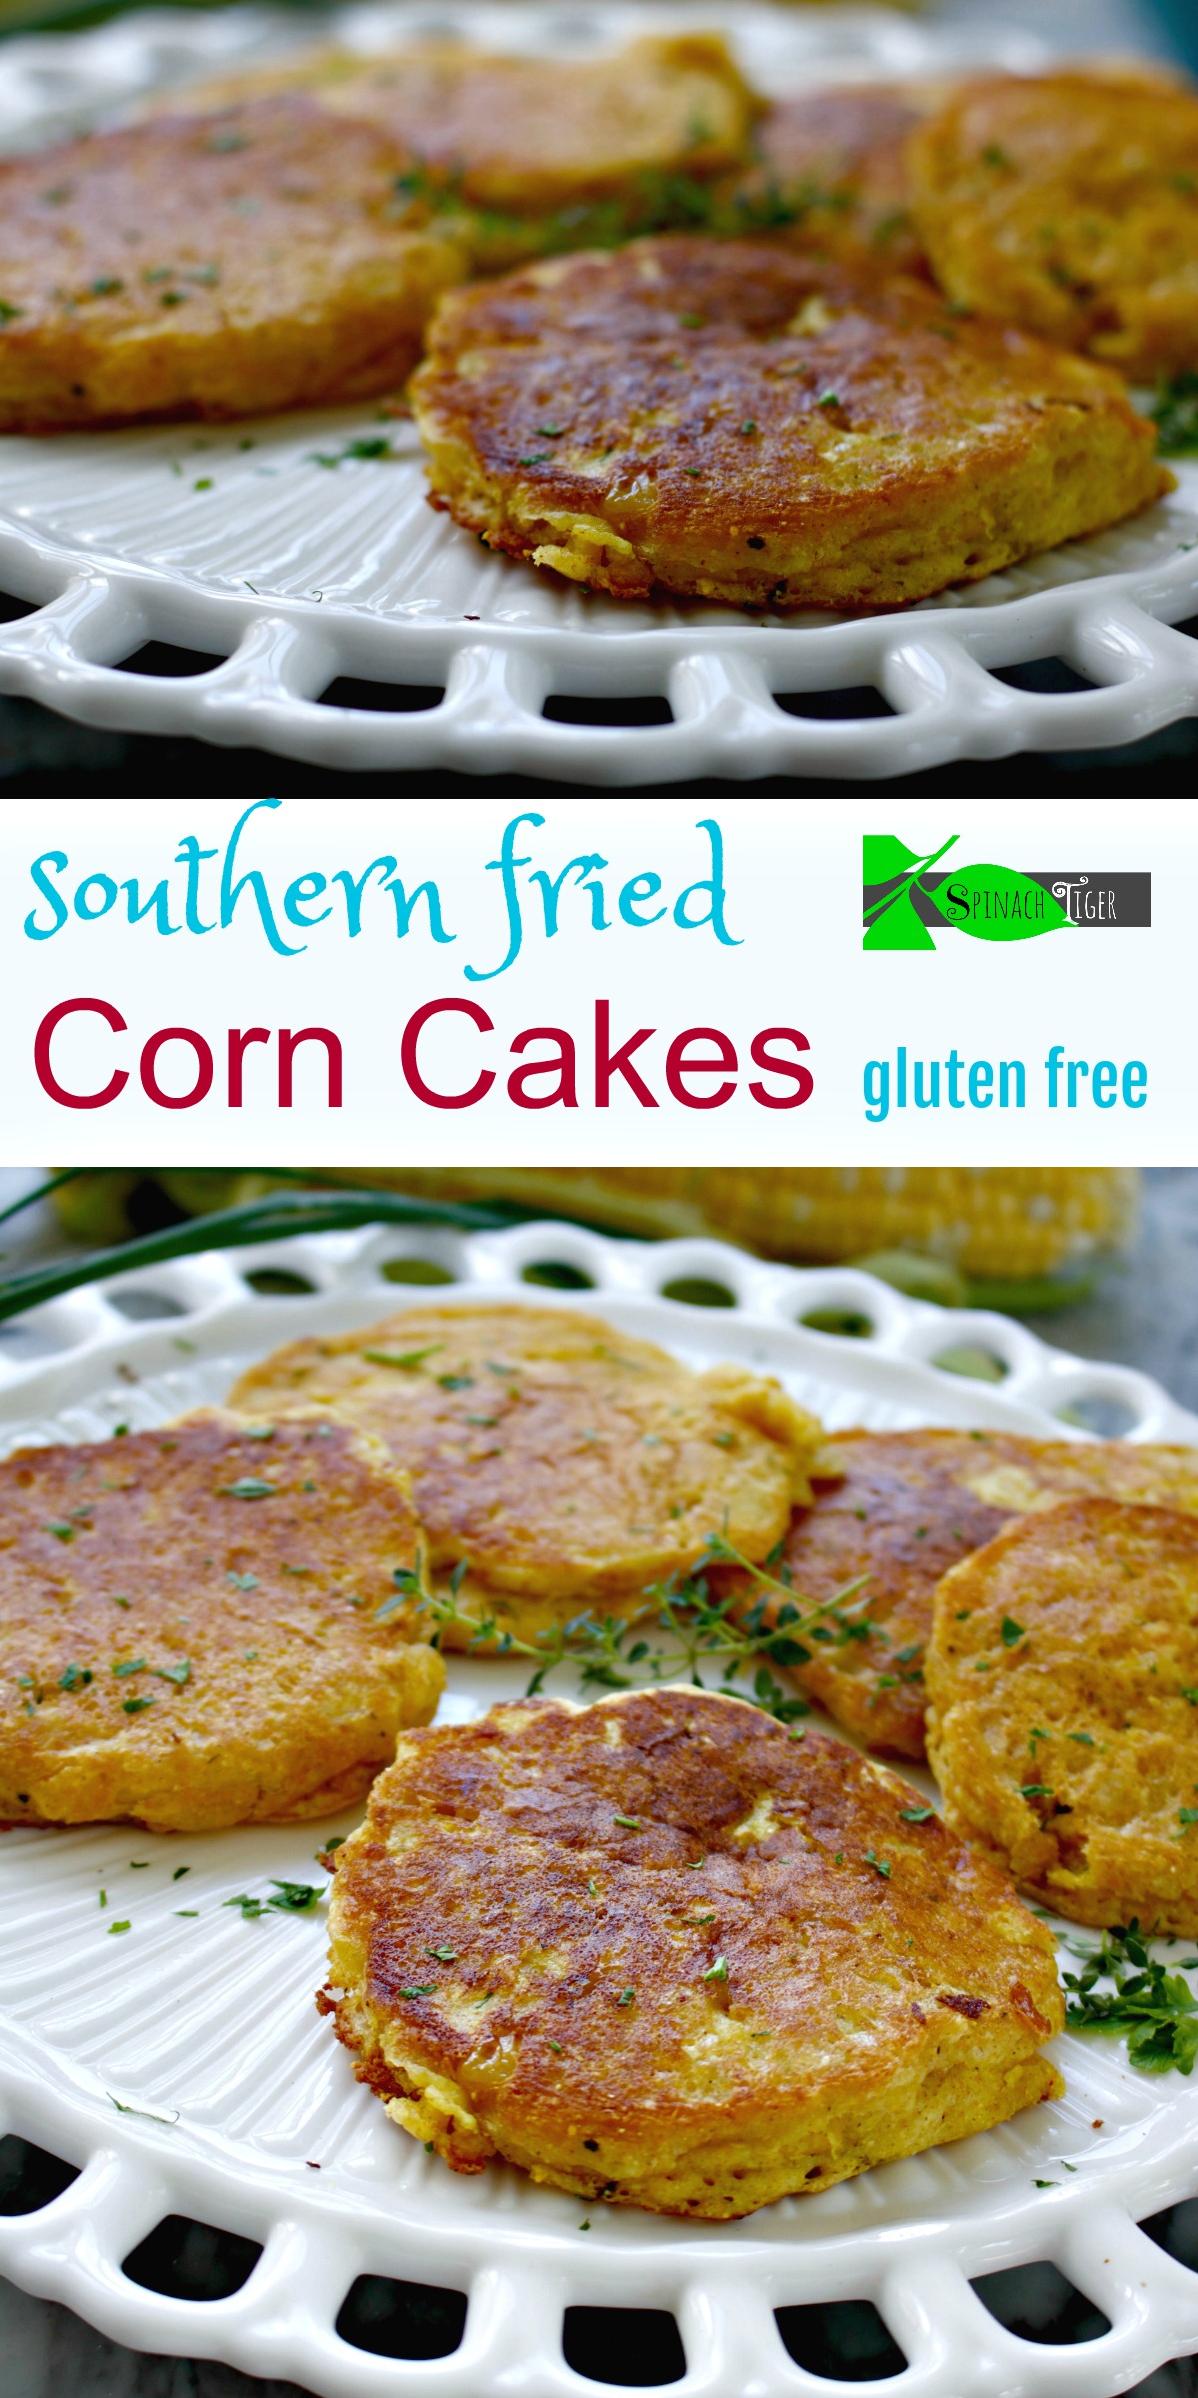  These patties are made with succulent tuna, mixed with vibrant corn kernels for a balanced meal.